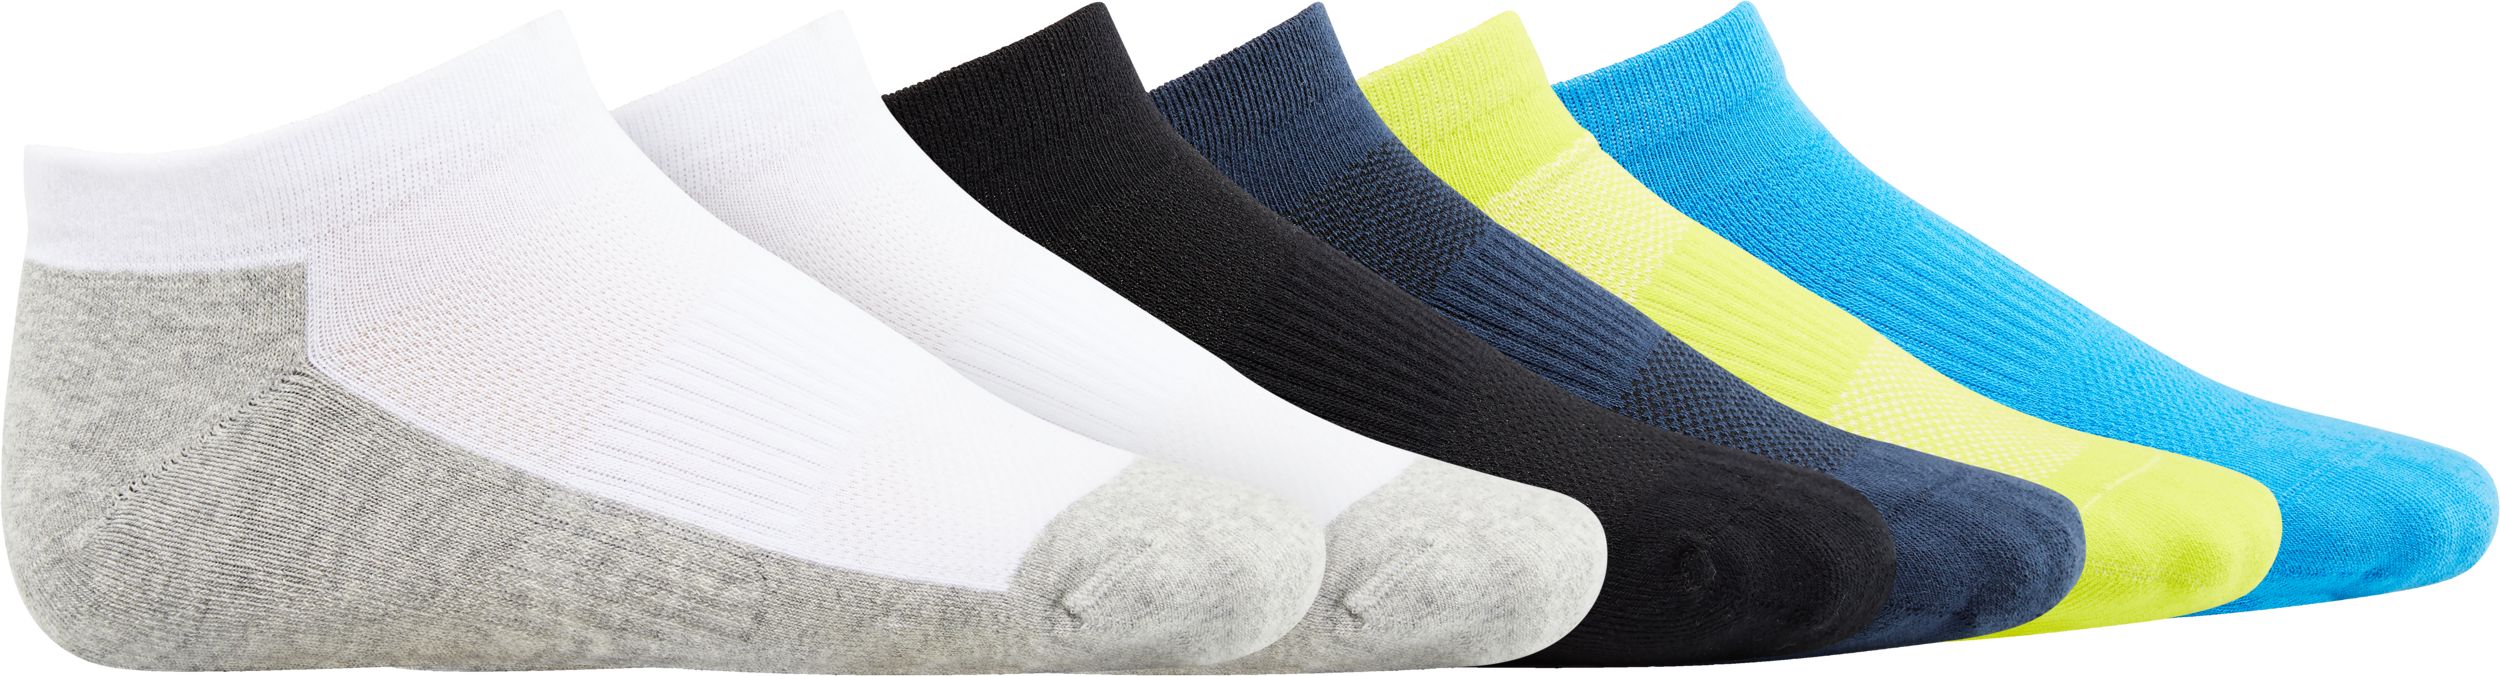 Image of FWD Boys' Athletic No Show Socks - 6 Pack